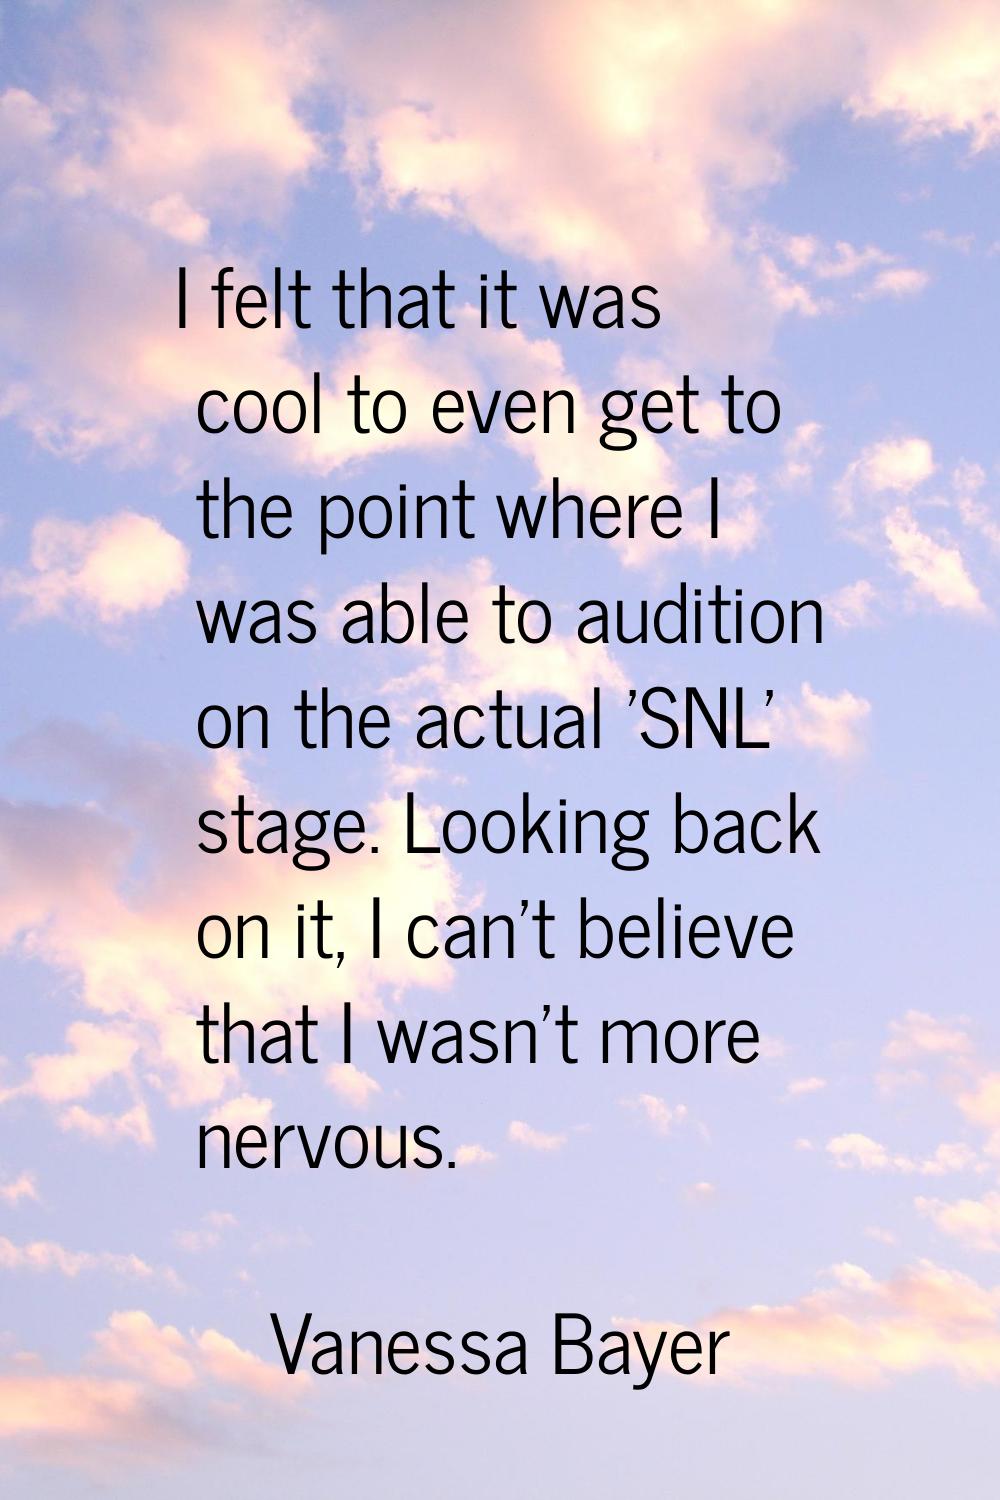 I felt that it was cool to even get to the point where I was able to audition on the actual 'SNL' s